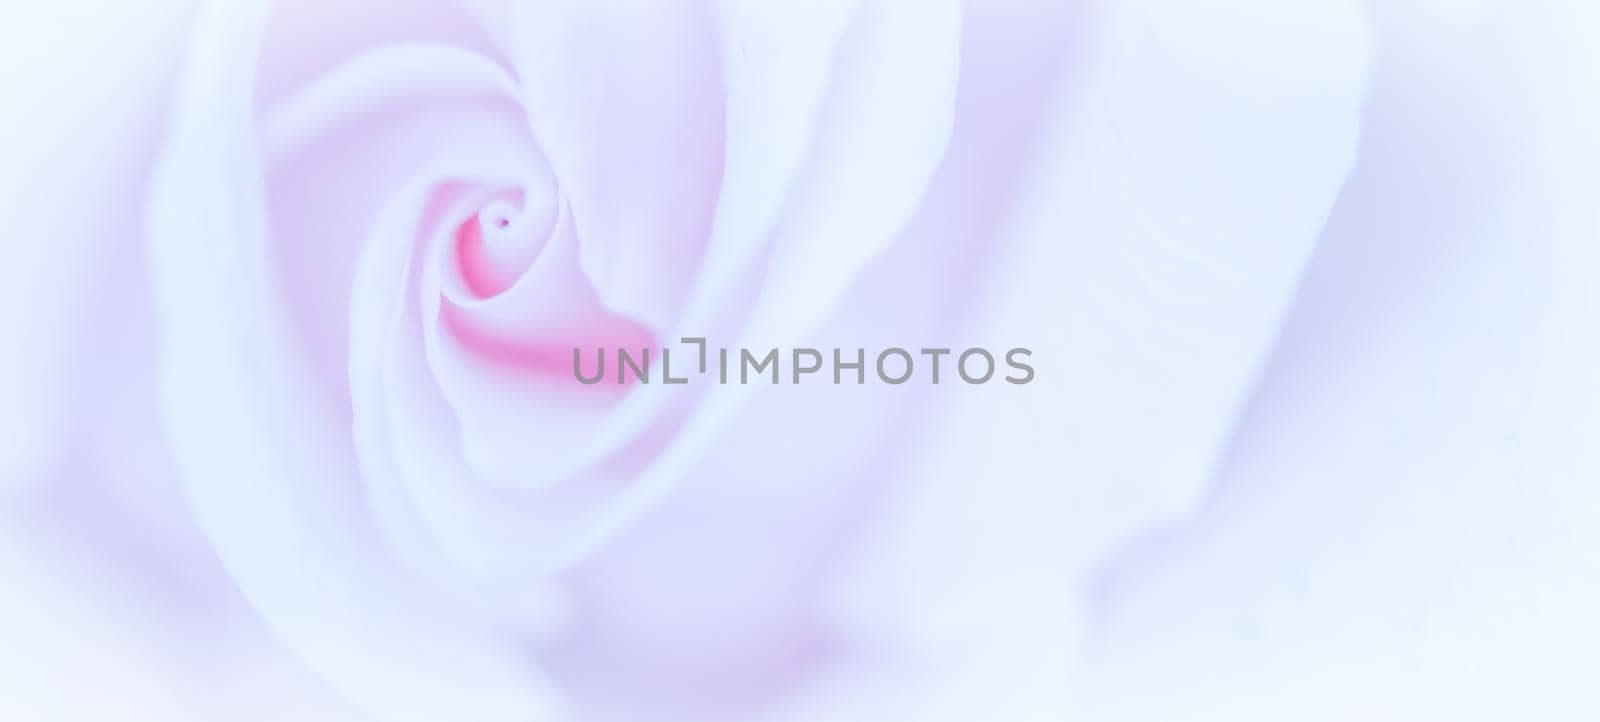 Soft focus, abstract floral background, purple rose flower. Macro flowers backdrop for holiday brand design by Olayola